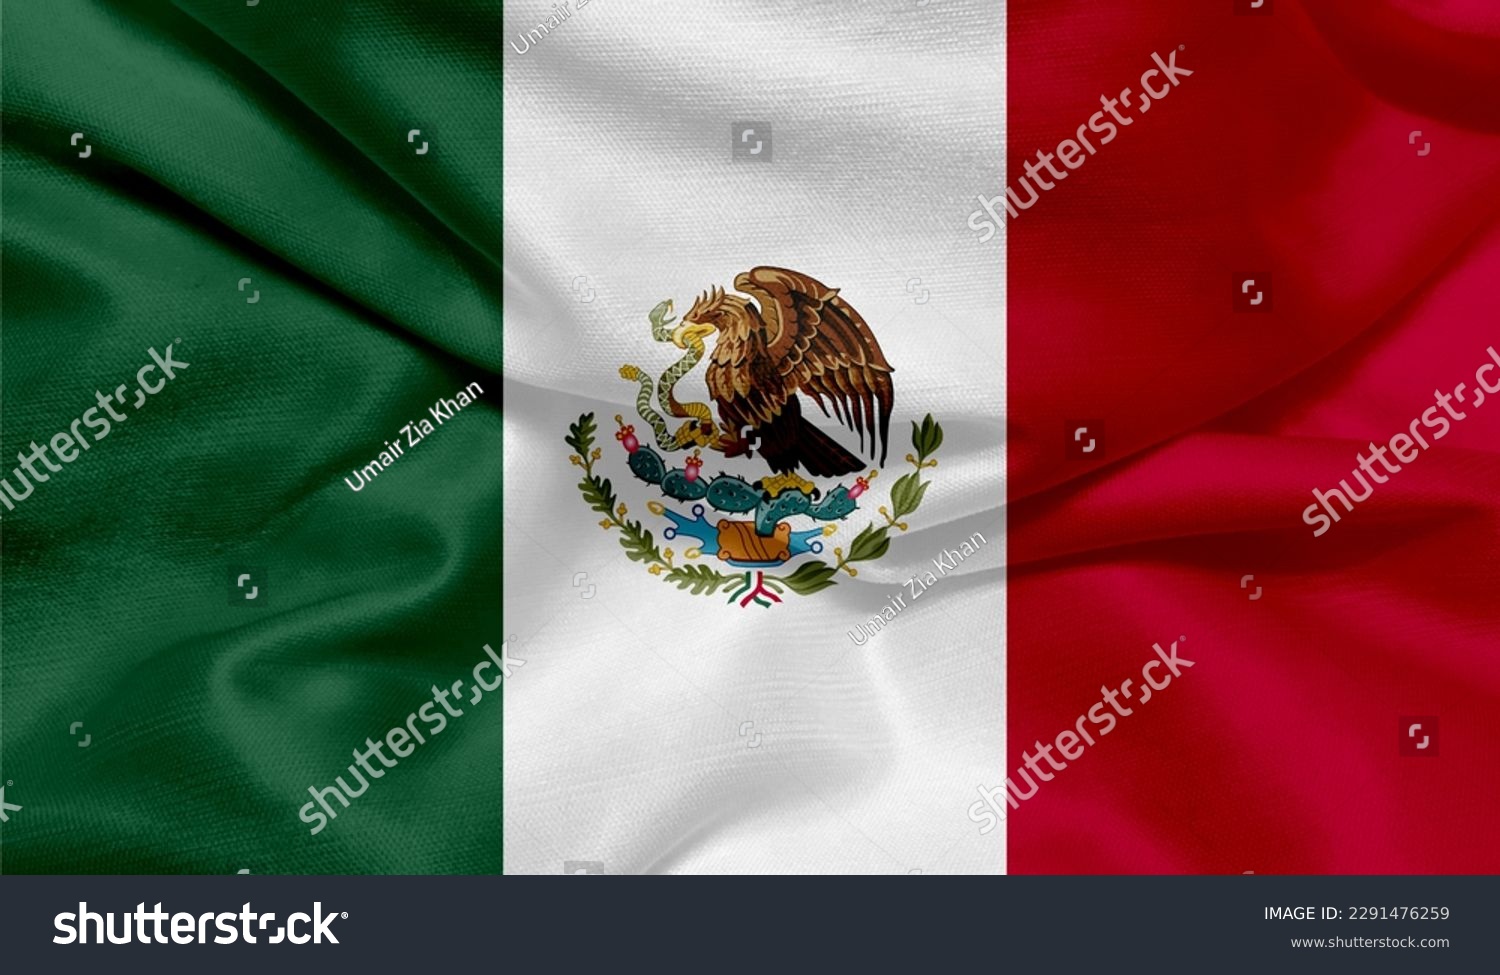 Realistic photo of the Mexico flag #2291476259